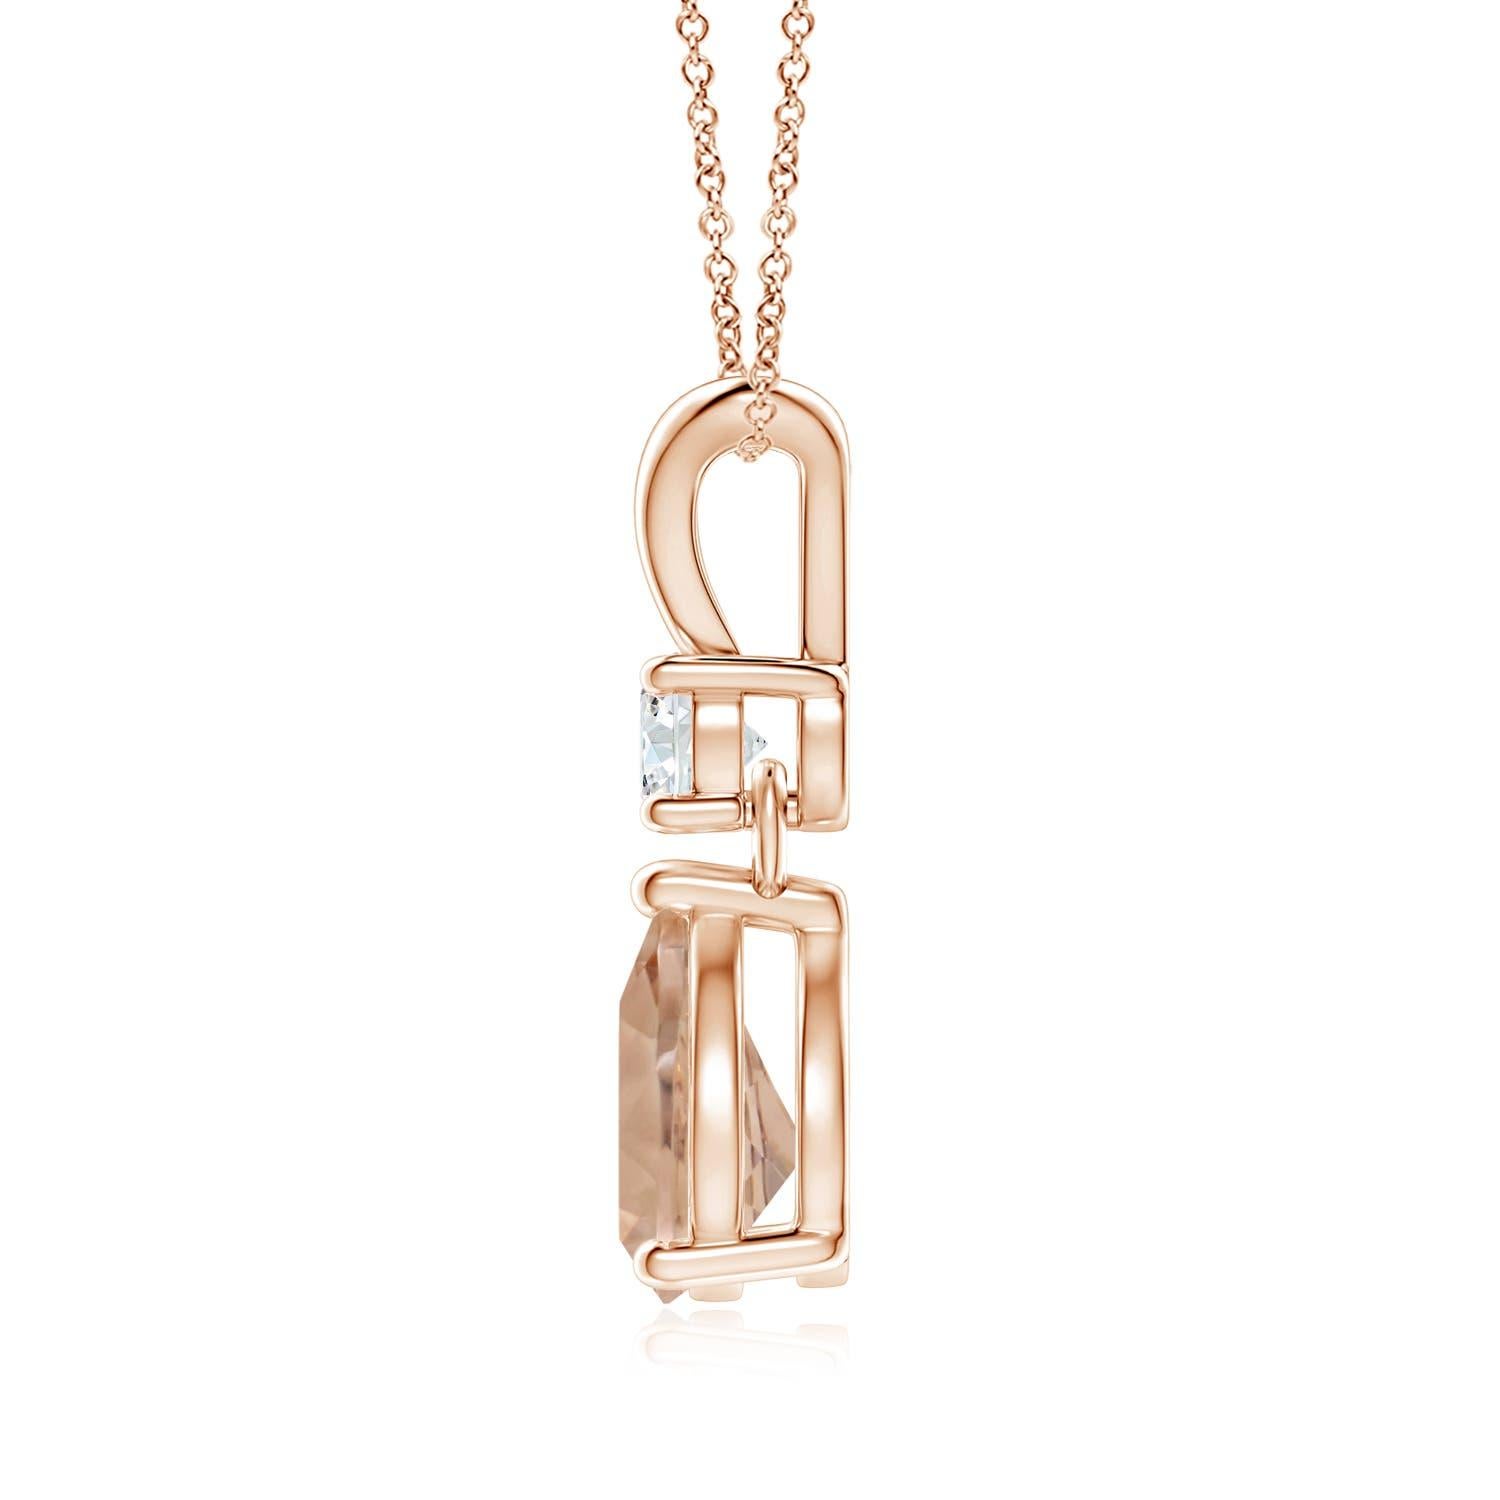 The GIA certified pear-shaped morganite is mounted in a prong setting. It is topped with a sparkling diamond and linked to a stylish V-bale. This 18k rose gold pendant has an unmissable feminine flair.
